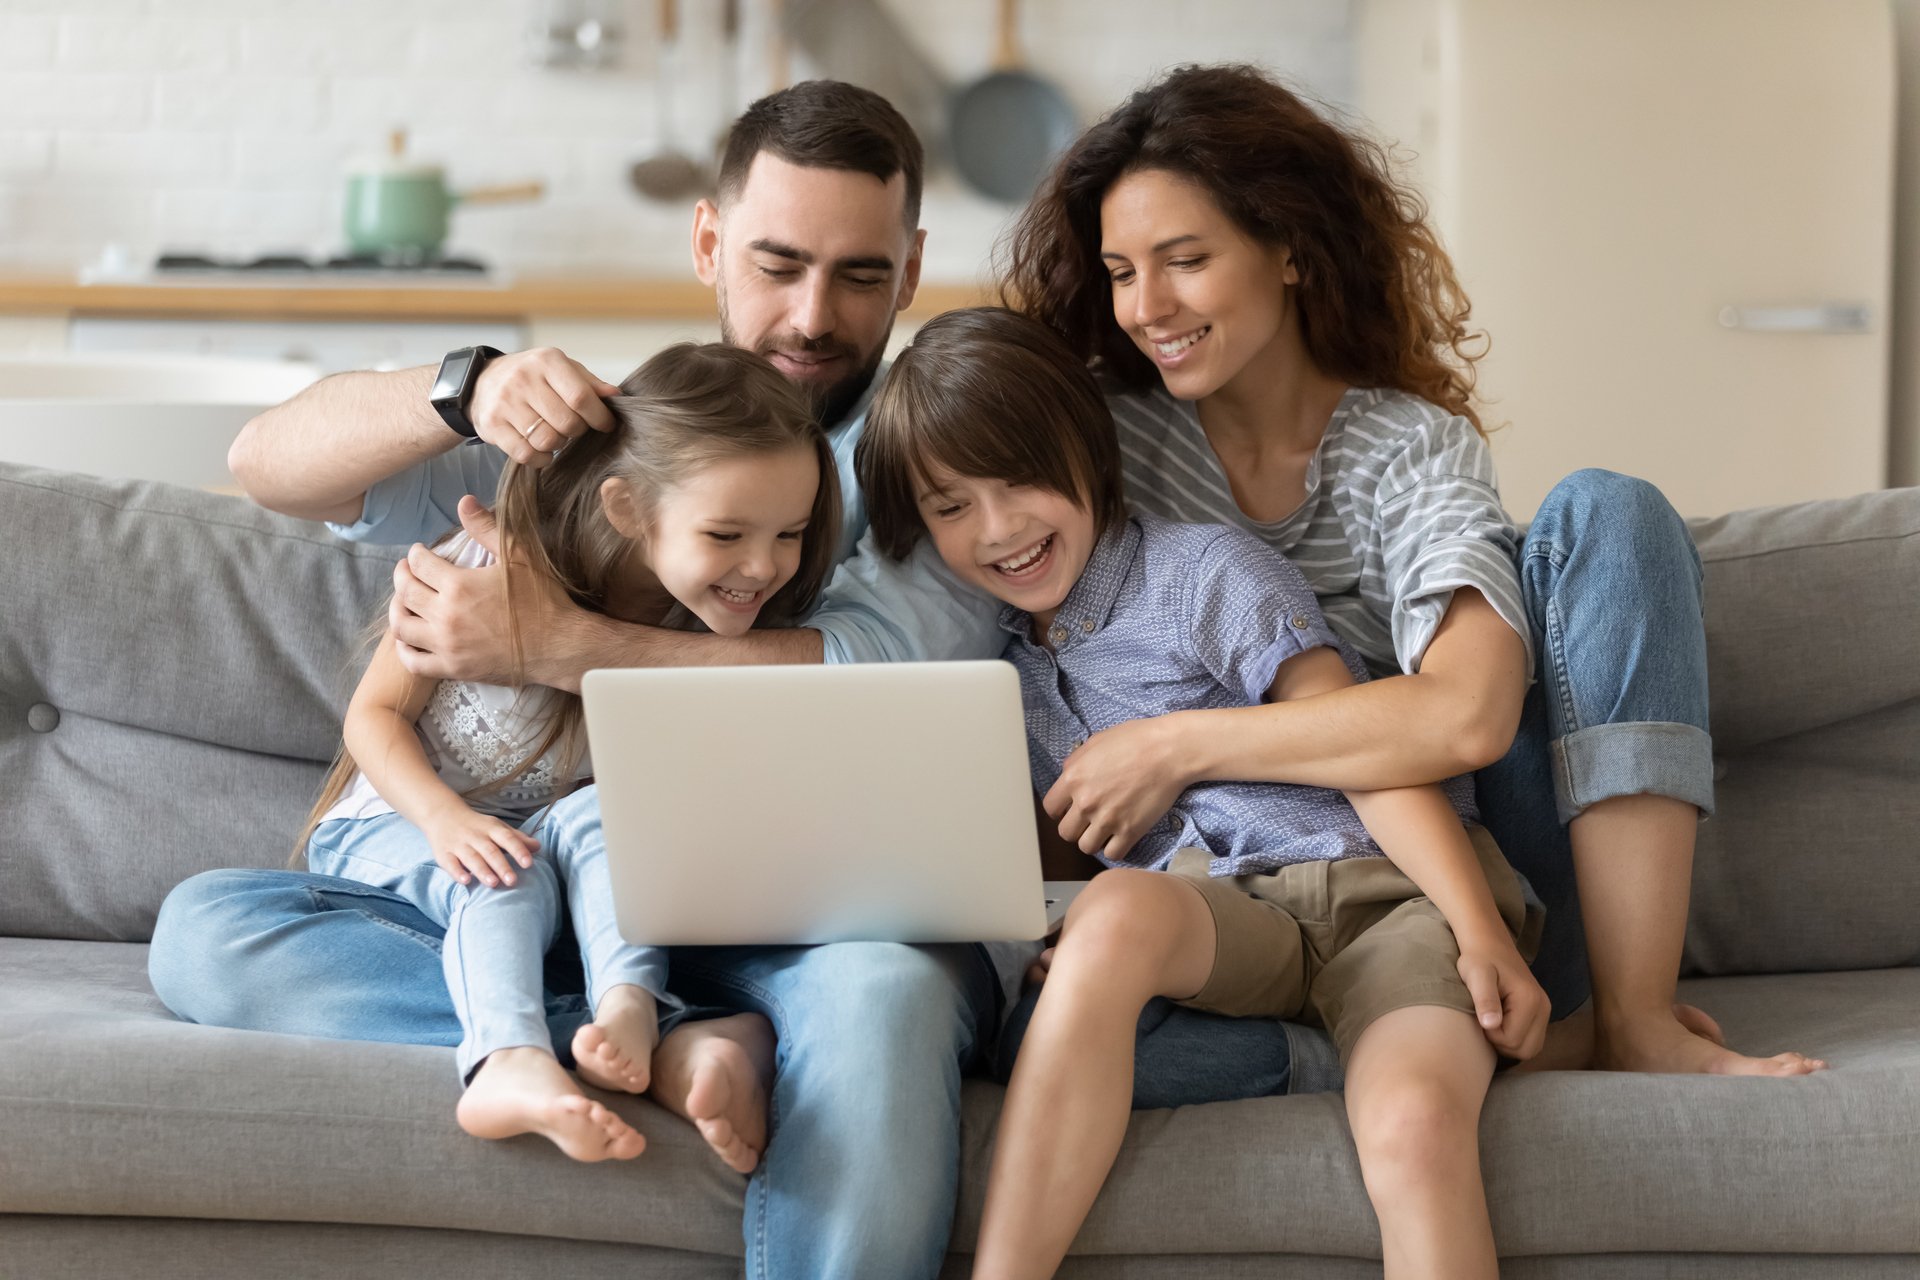 Family-with-kids-spend-time-together-using-laptop-websites-1198401598_6720x4480